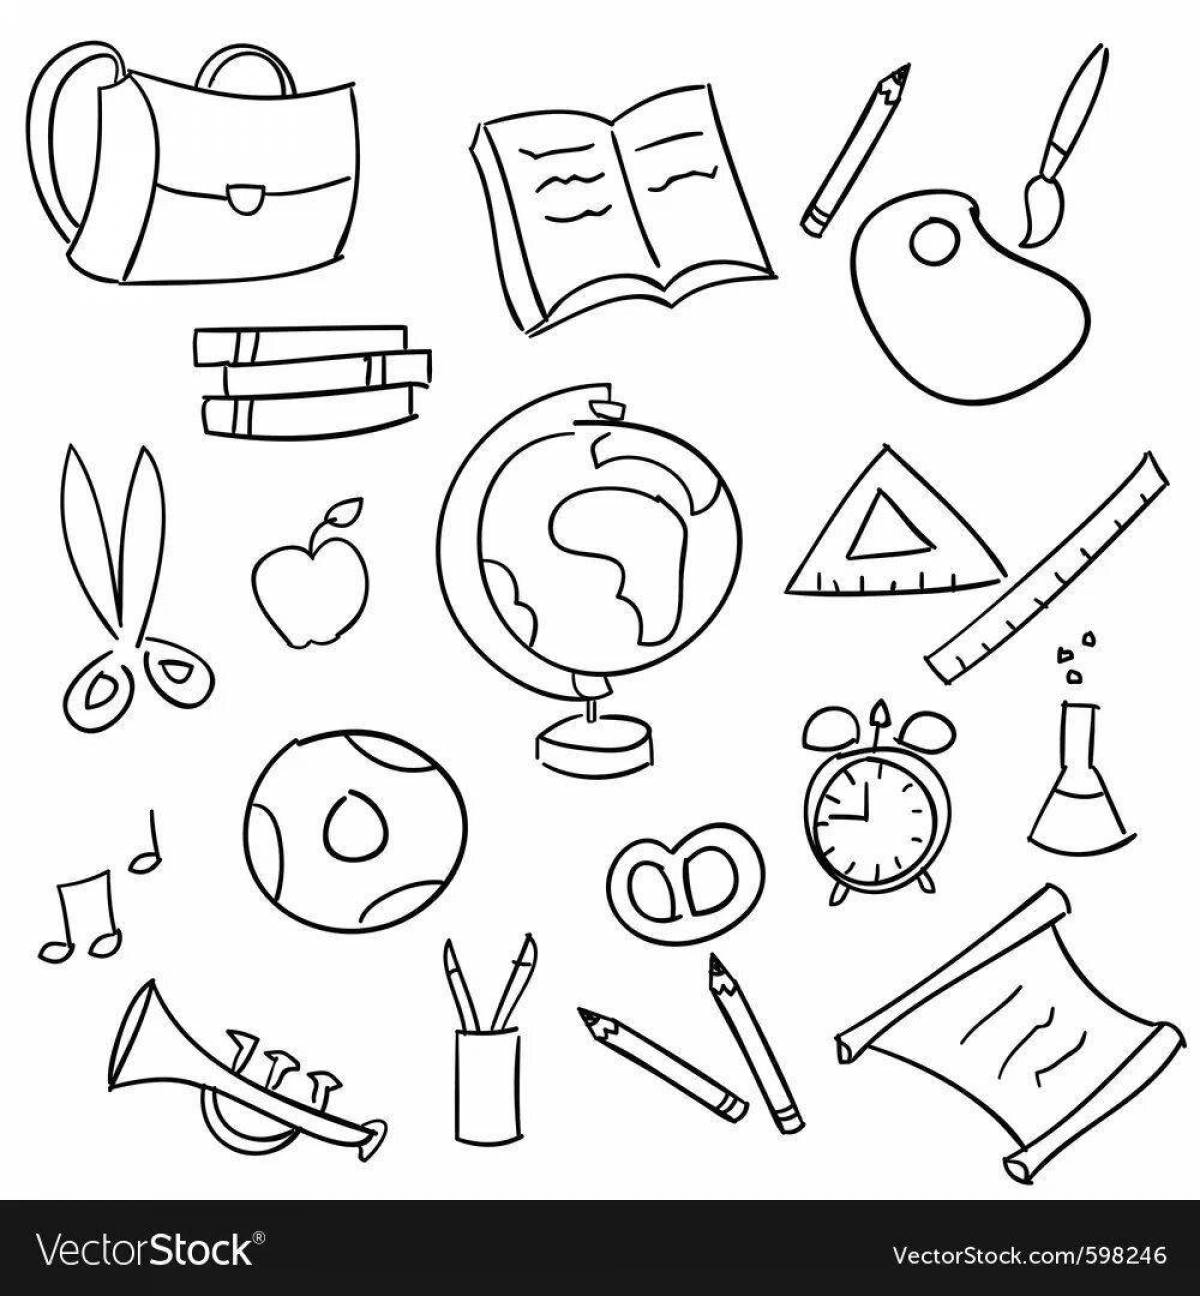 Joyful school supplies coloring pages for kids